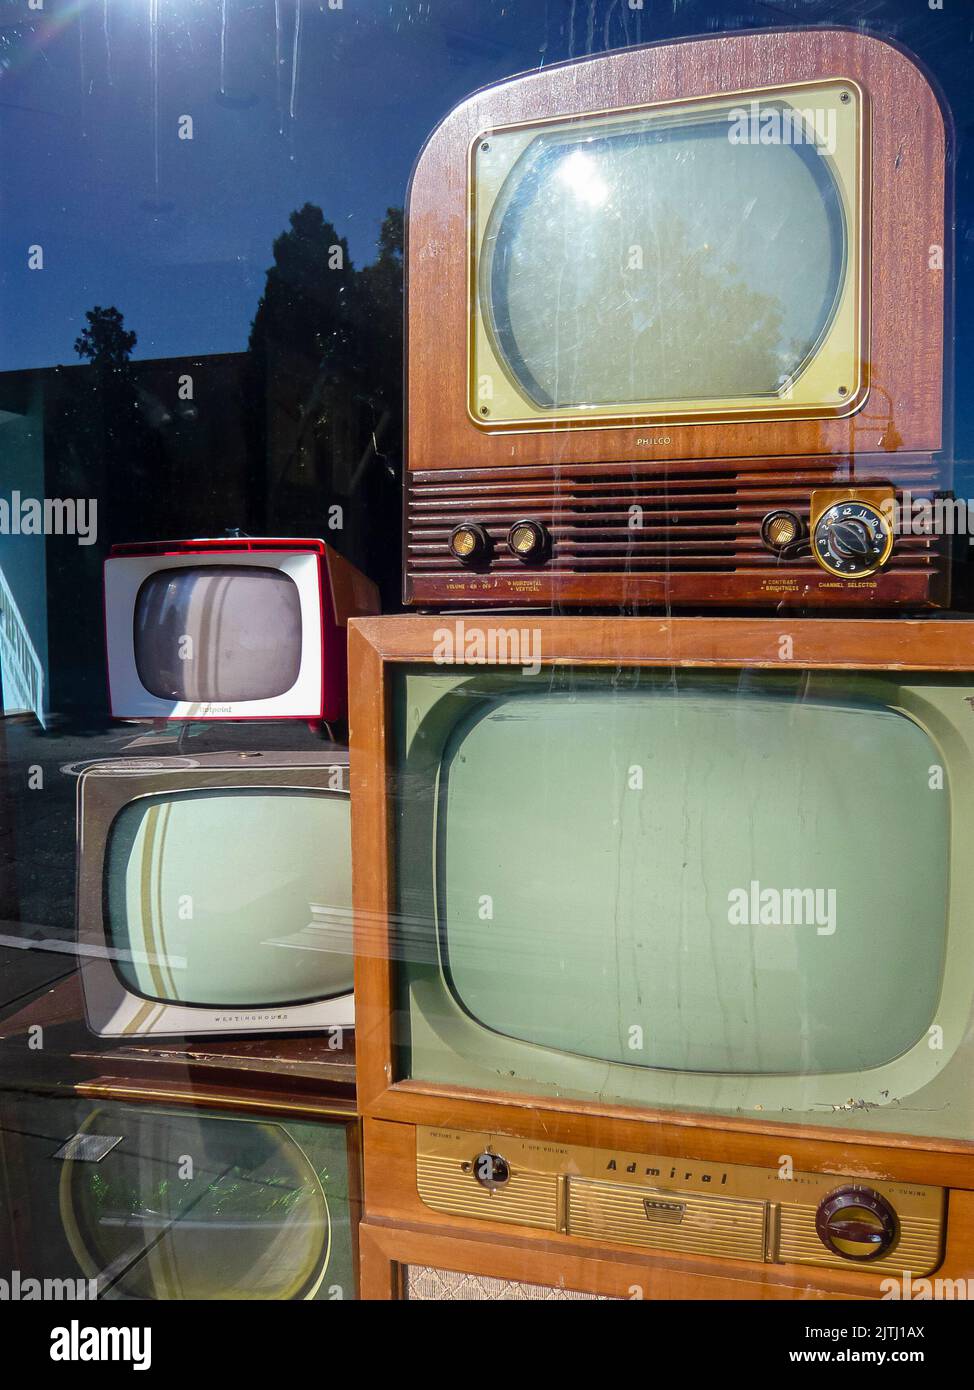 Old fashioned television shop with an old wooden television in the window Stock Photo